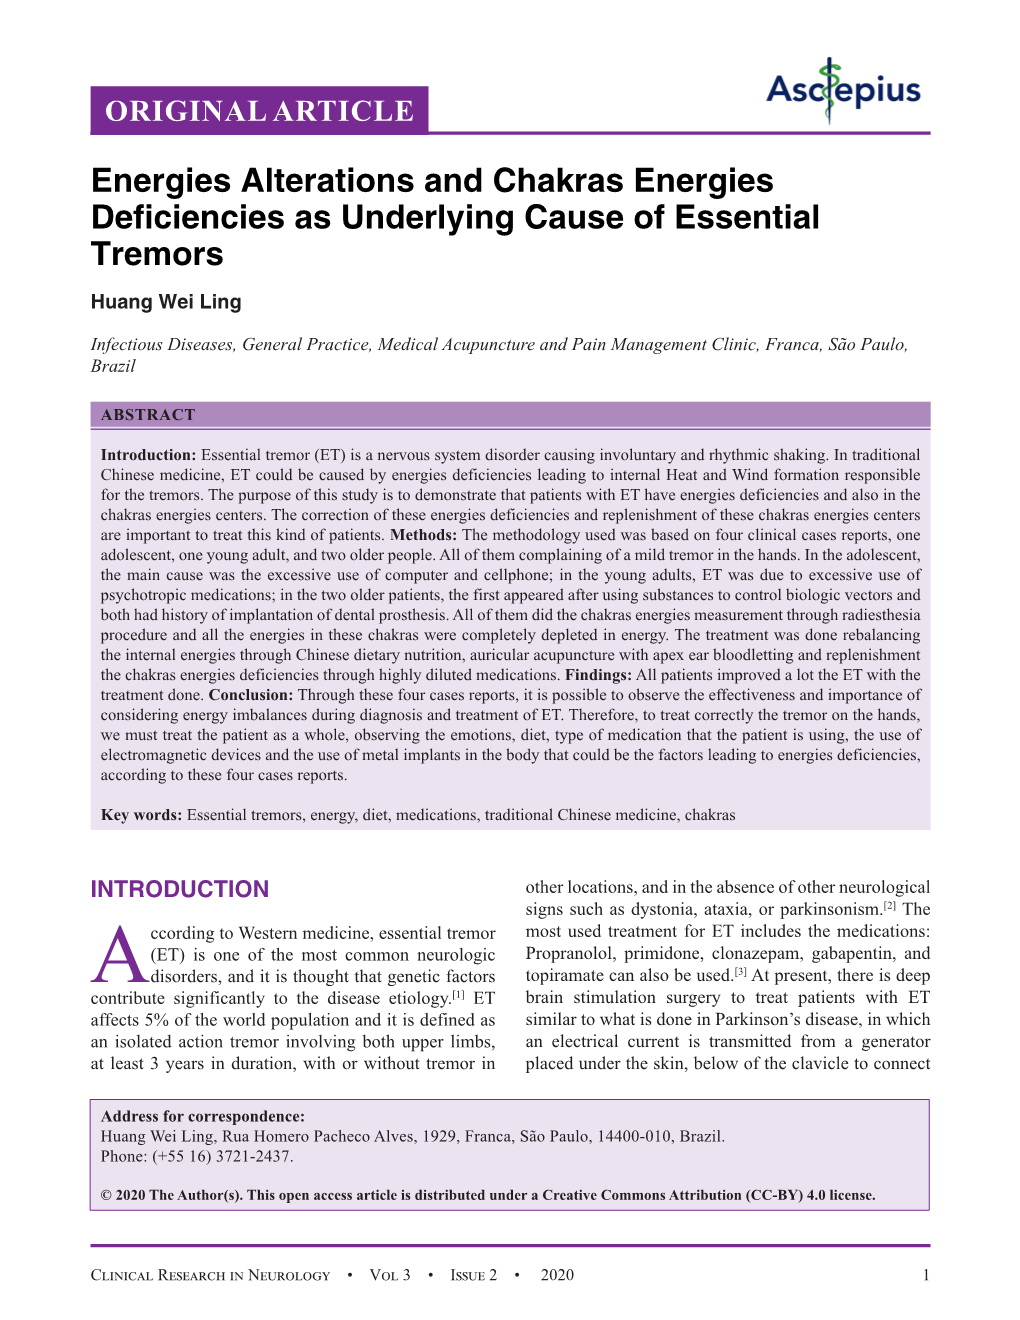 Energies Alterations and Chakras Energies Deficiencies As Underlying Cause of Essential Tremors Huang Wei Ling